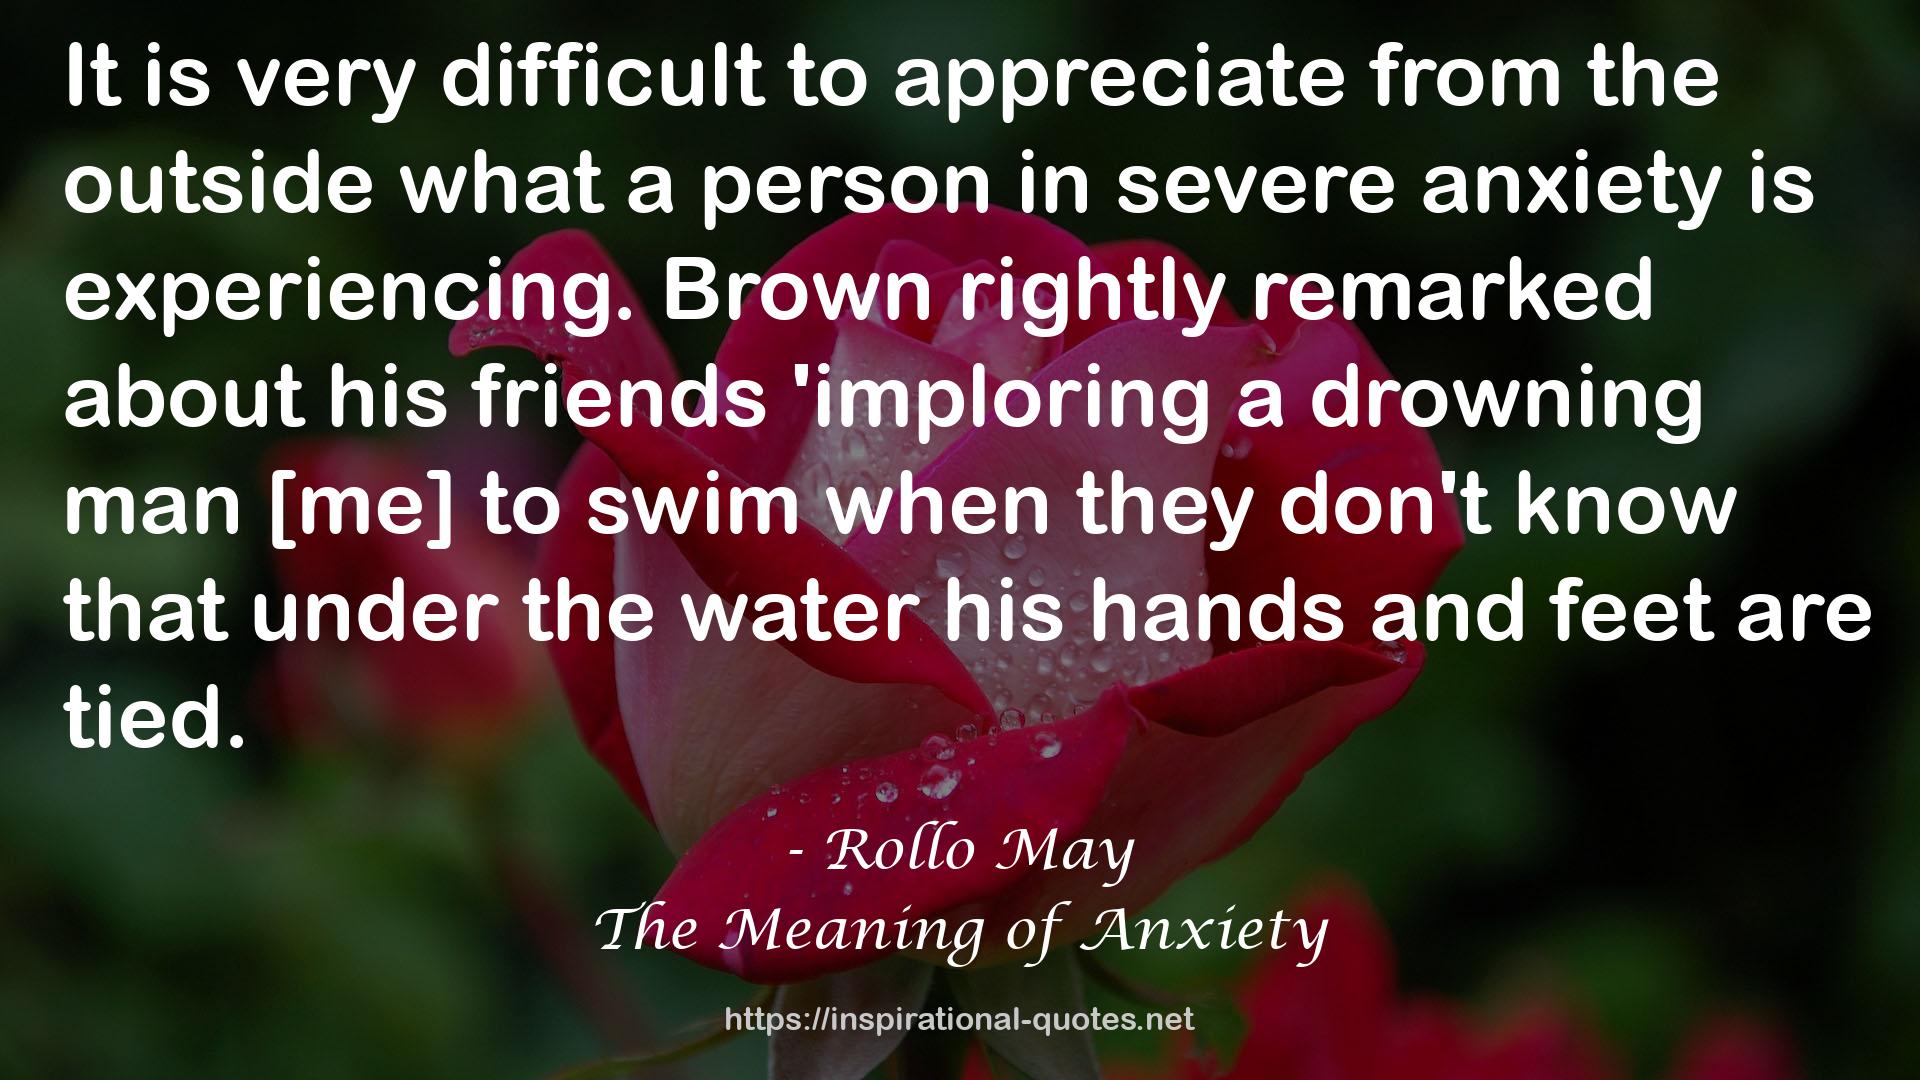 Rollo May QUOTES